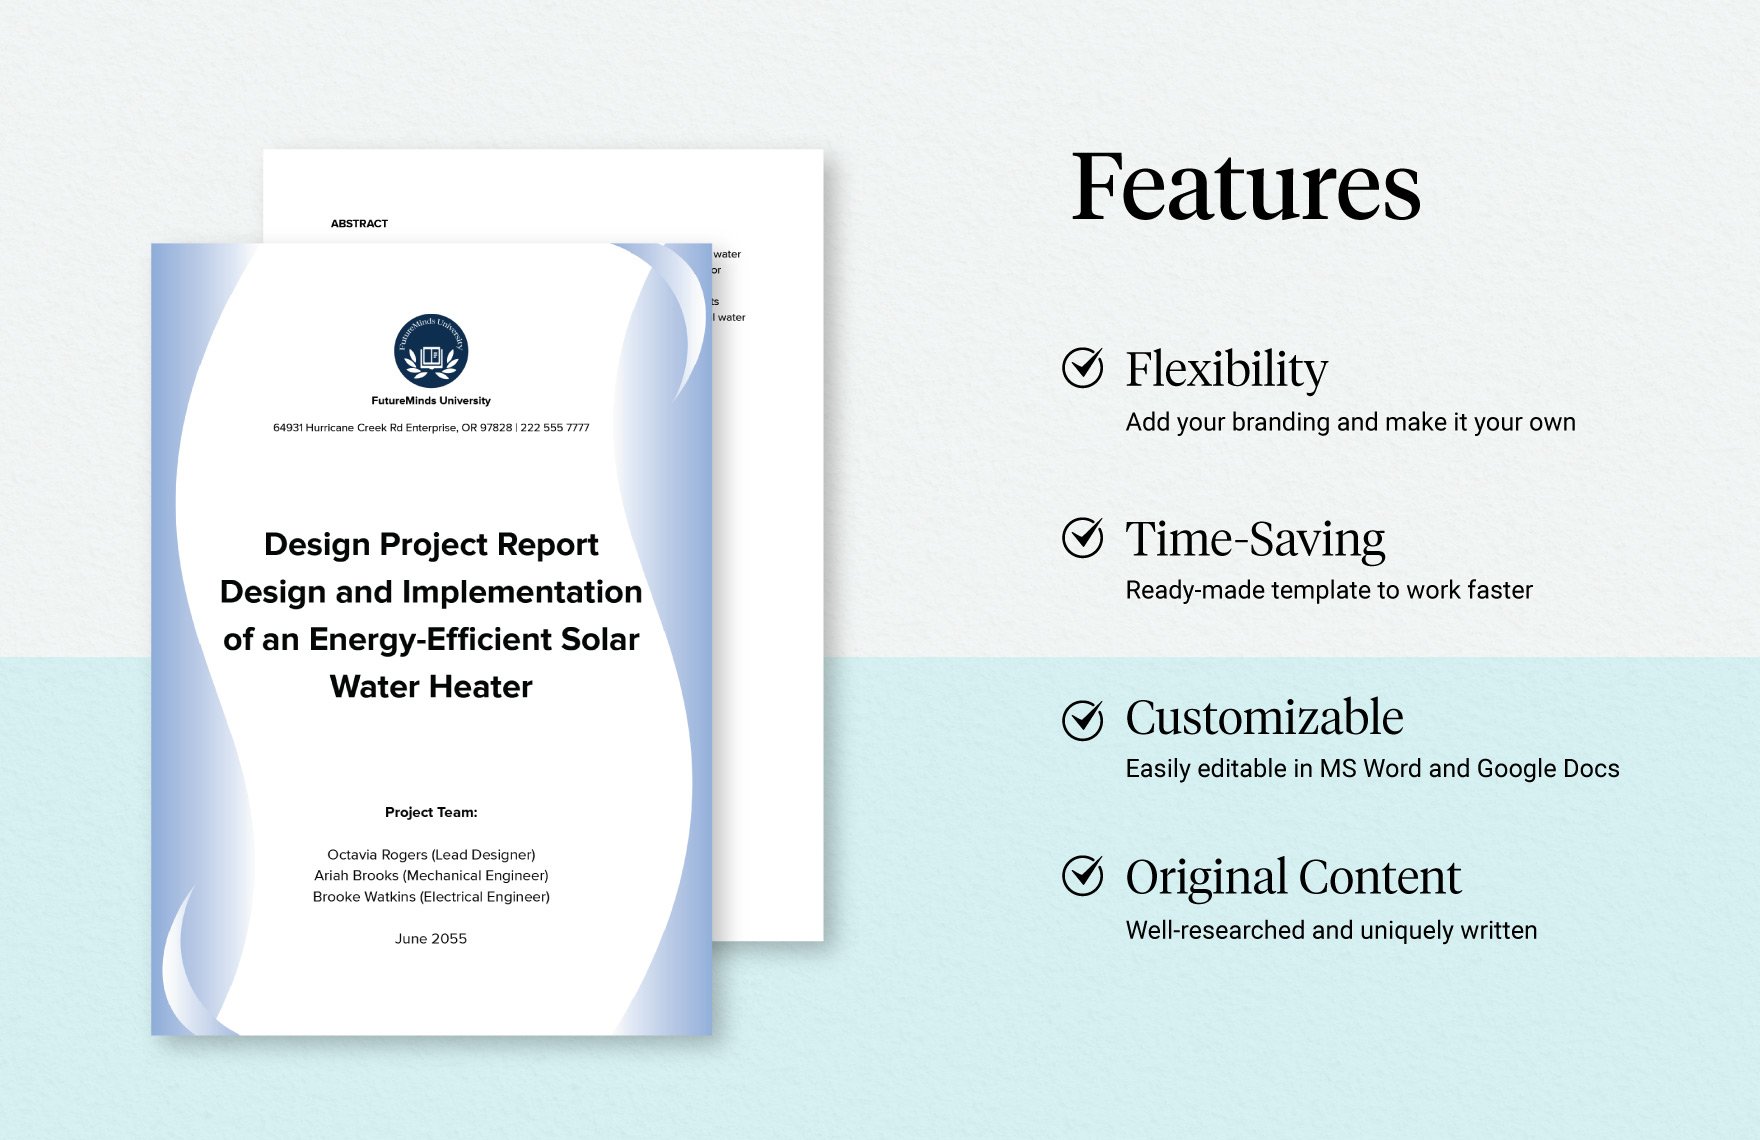 Design Project Report Template